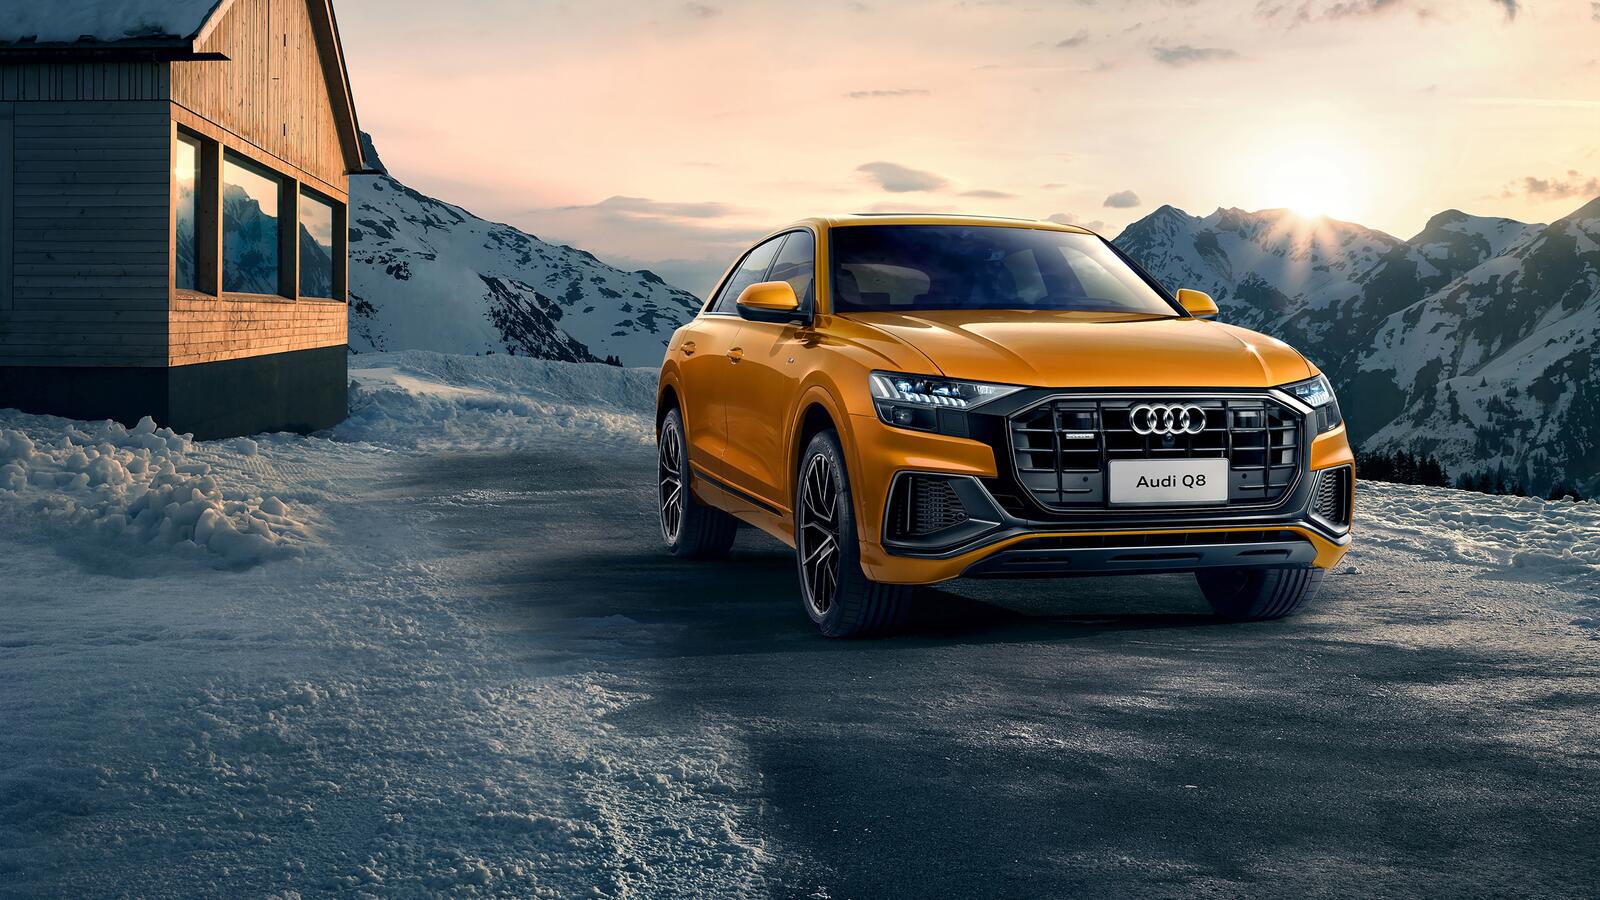 Free photo Audi q8 against the backdrop of snowy mountains